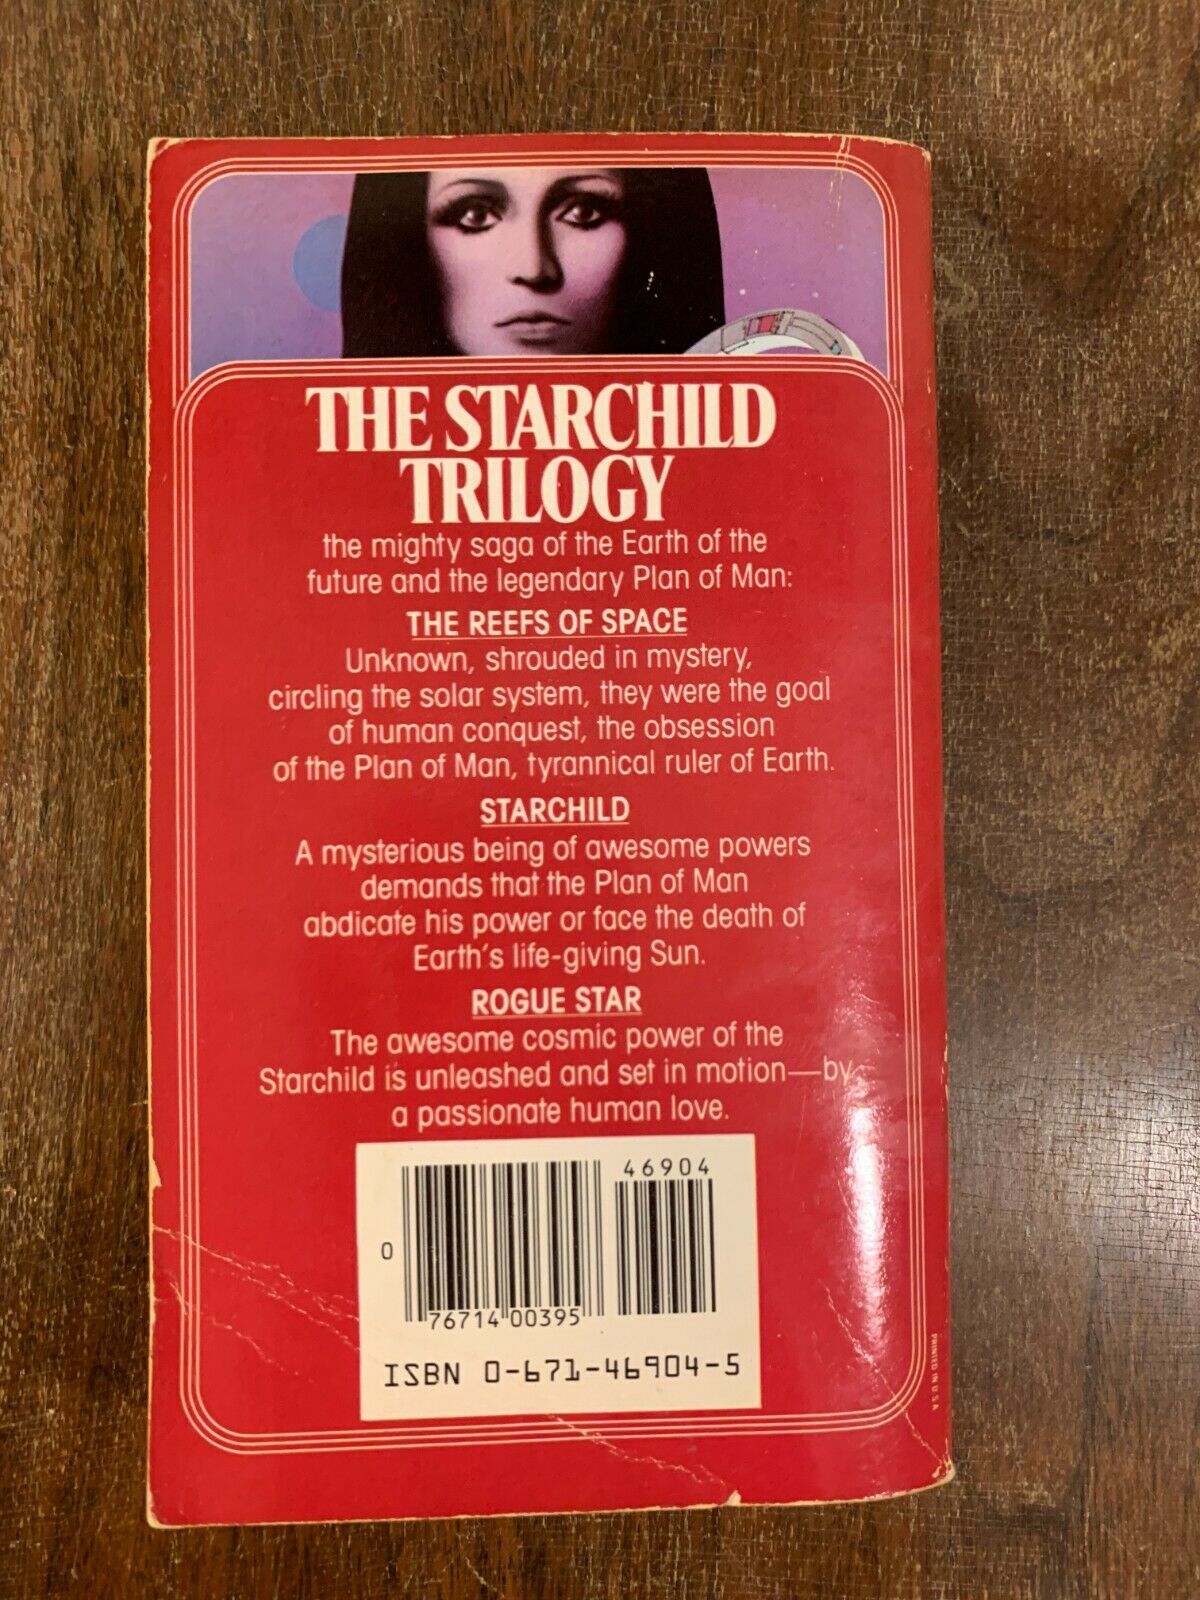 The Starchild Trilogy, F. Paul Wilson and Frederick Pohl, 1st PB Print, 1977 4B